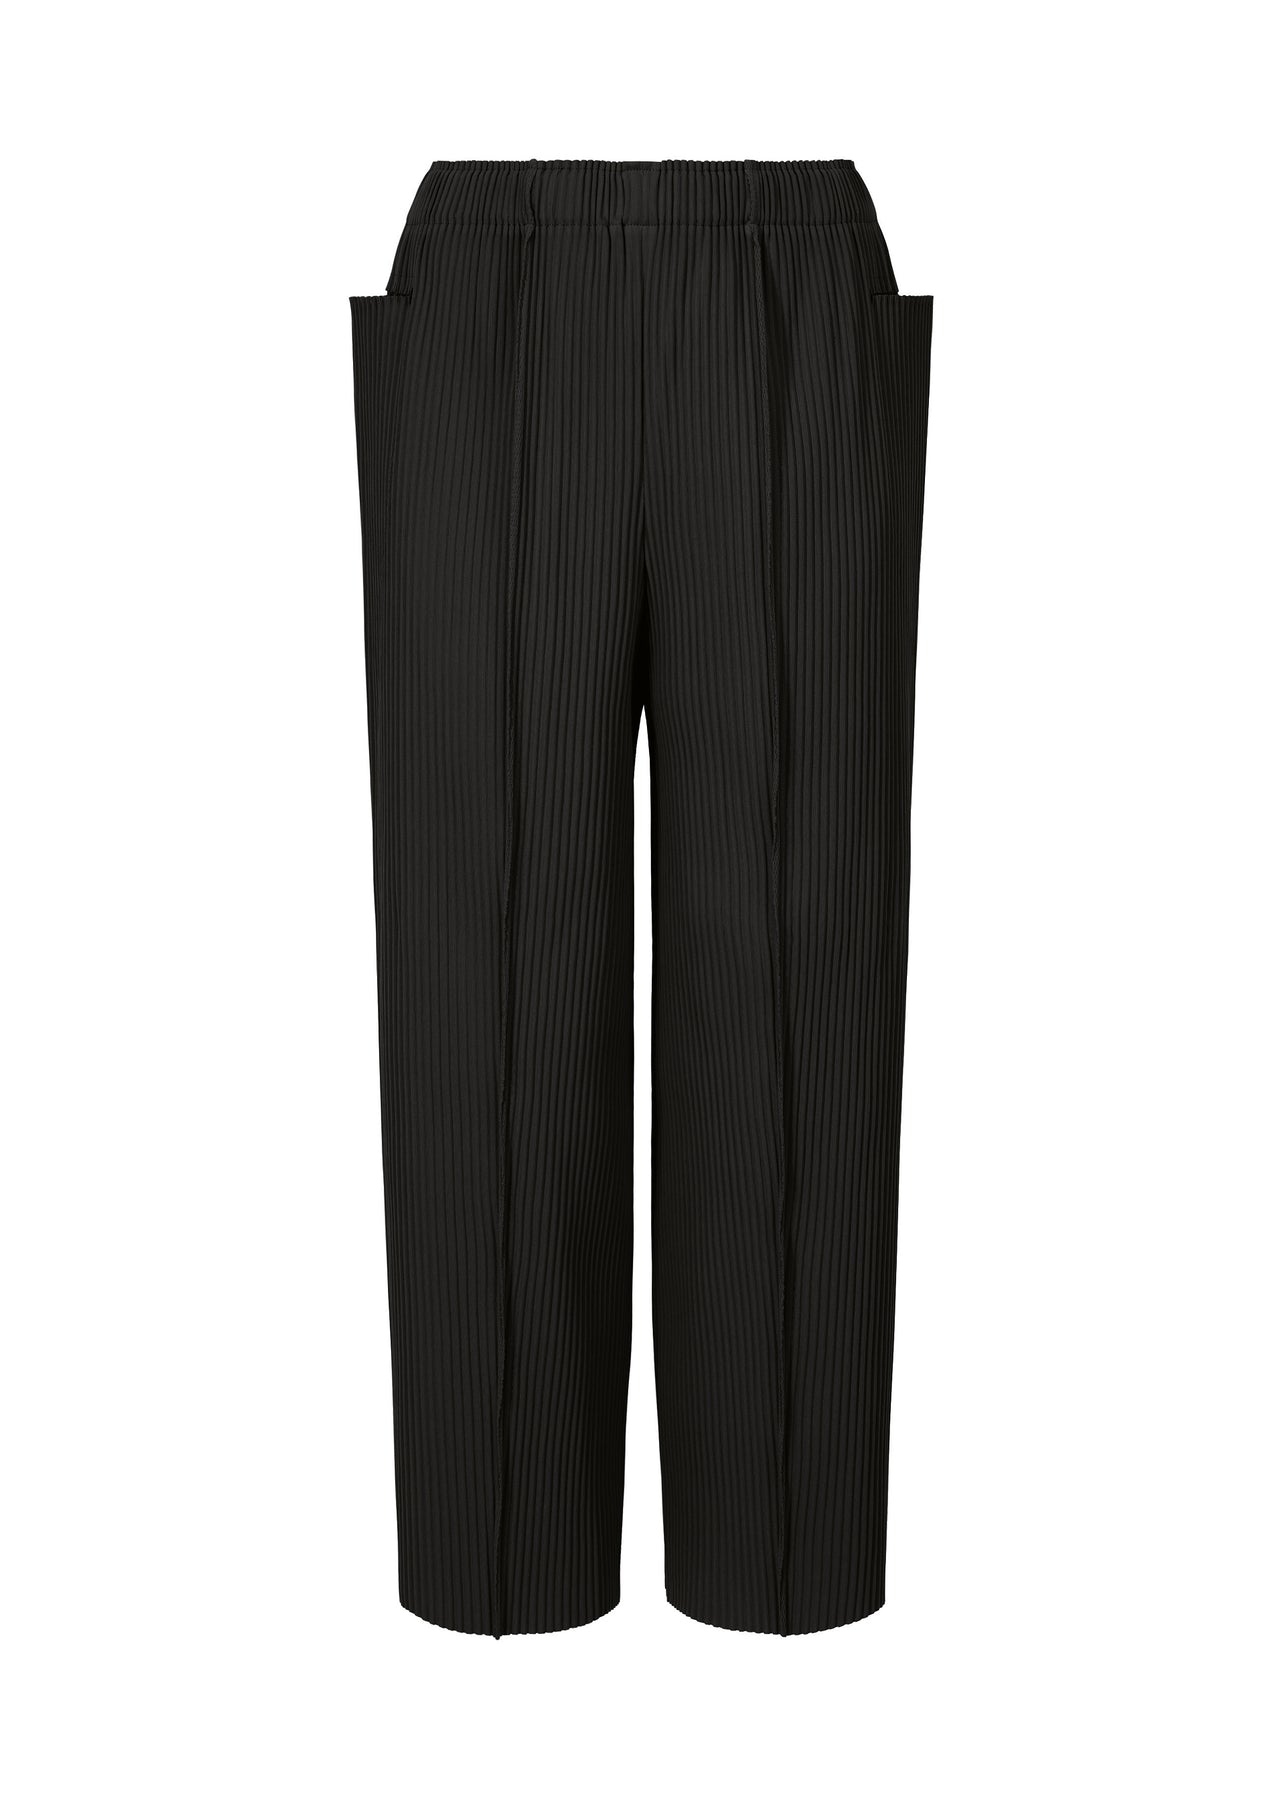 FINE KNIT PLEATS BOTTOM 3 PANTS | The official ISSEY MIYAKE ONLINE